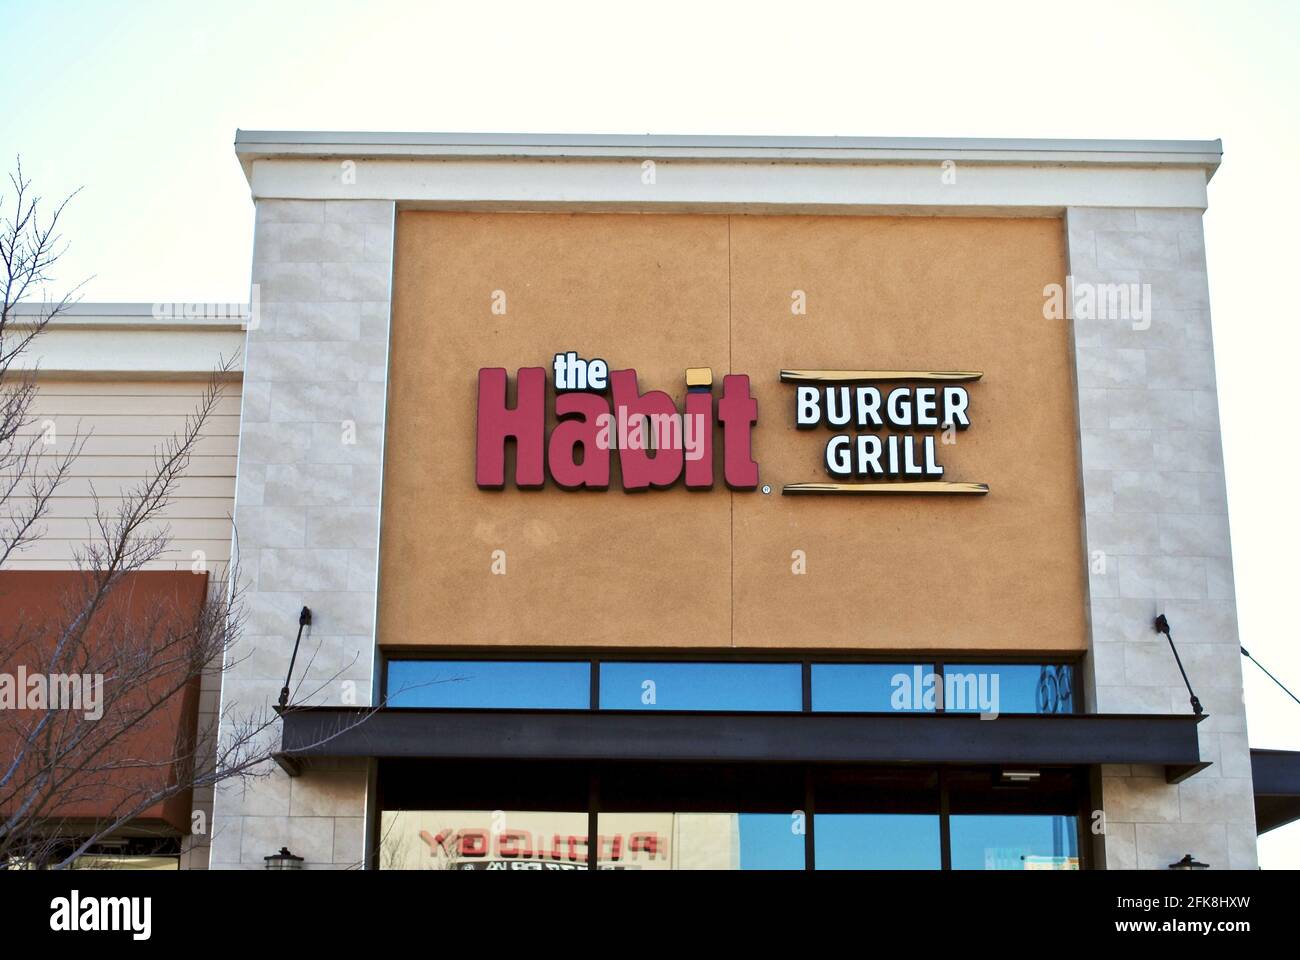 The Habit Burger Grill is an American fast casual restaurant chain that specializes in charbroiled hamburgers. Headquartered in Irvine, California. Stock Photo